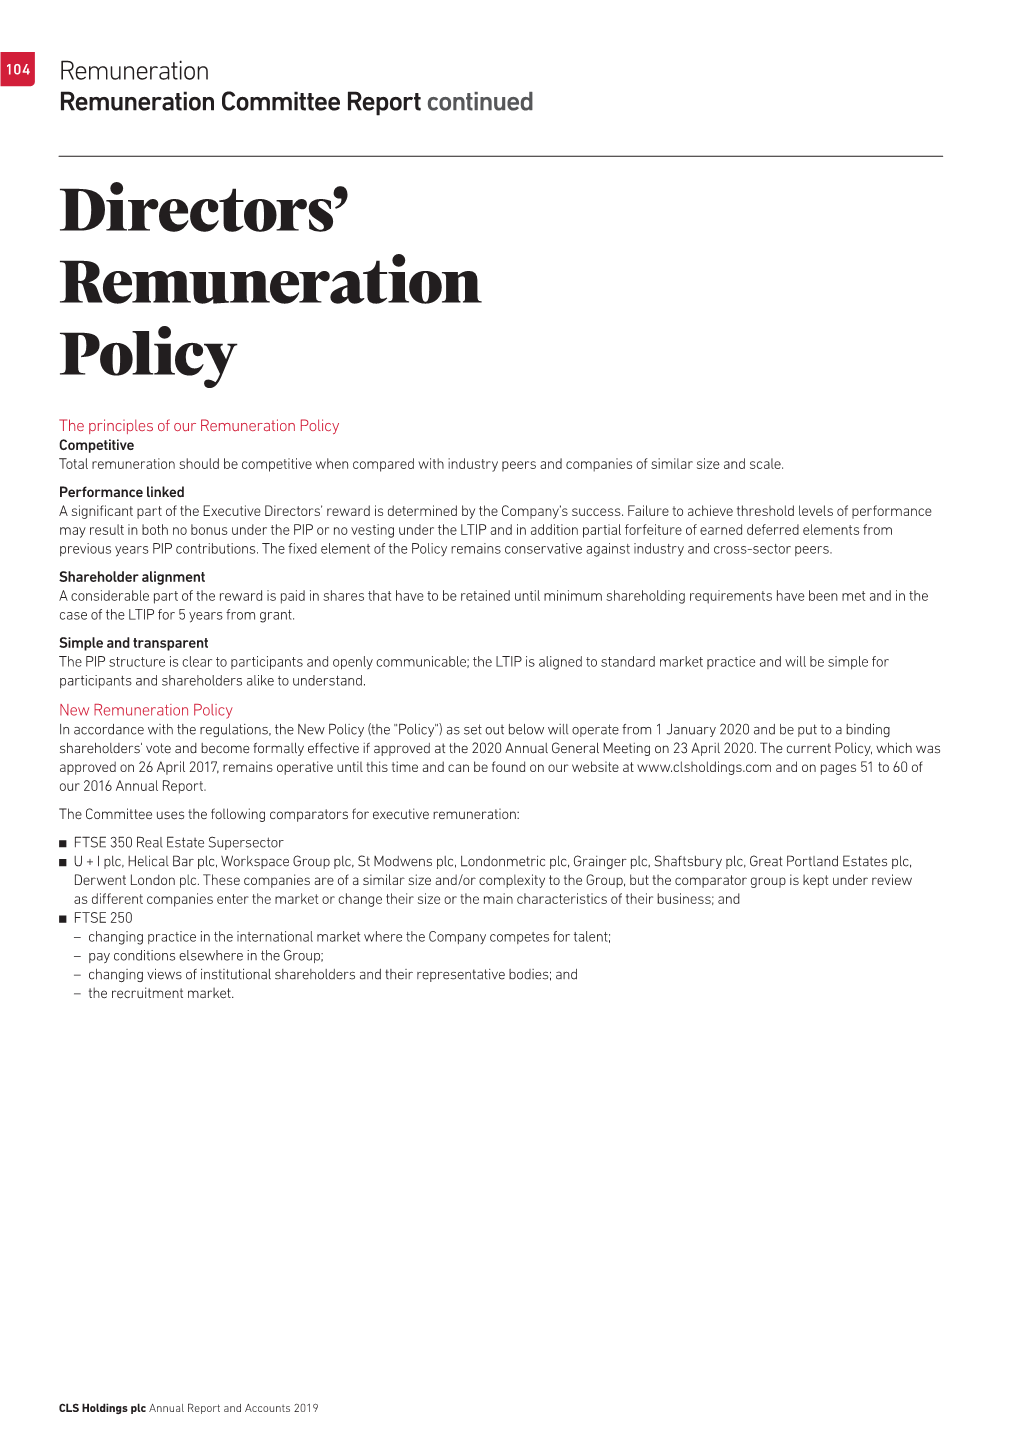 Directors' Remuneration Policy